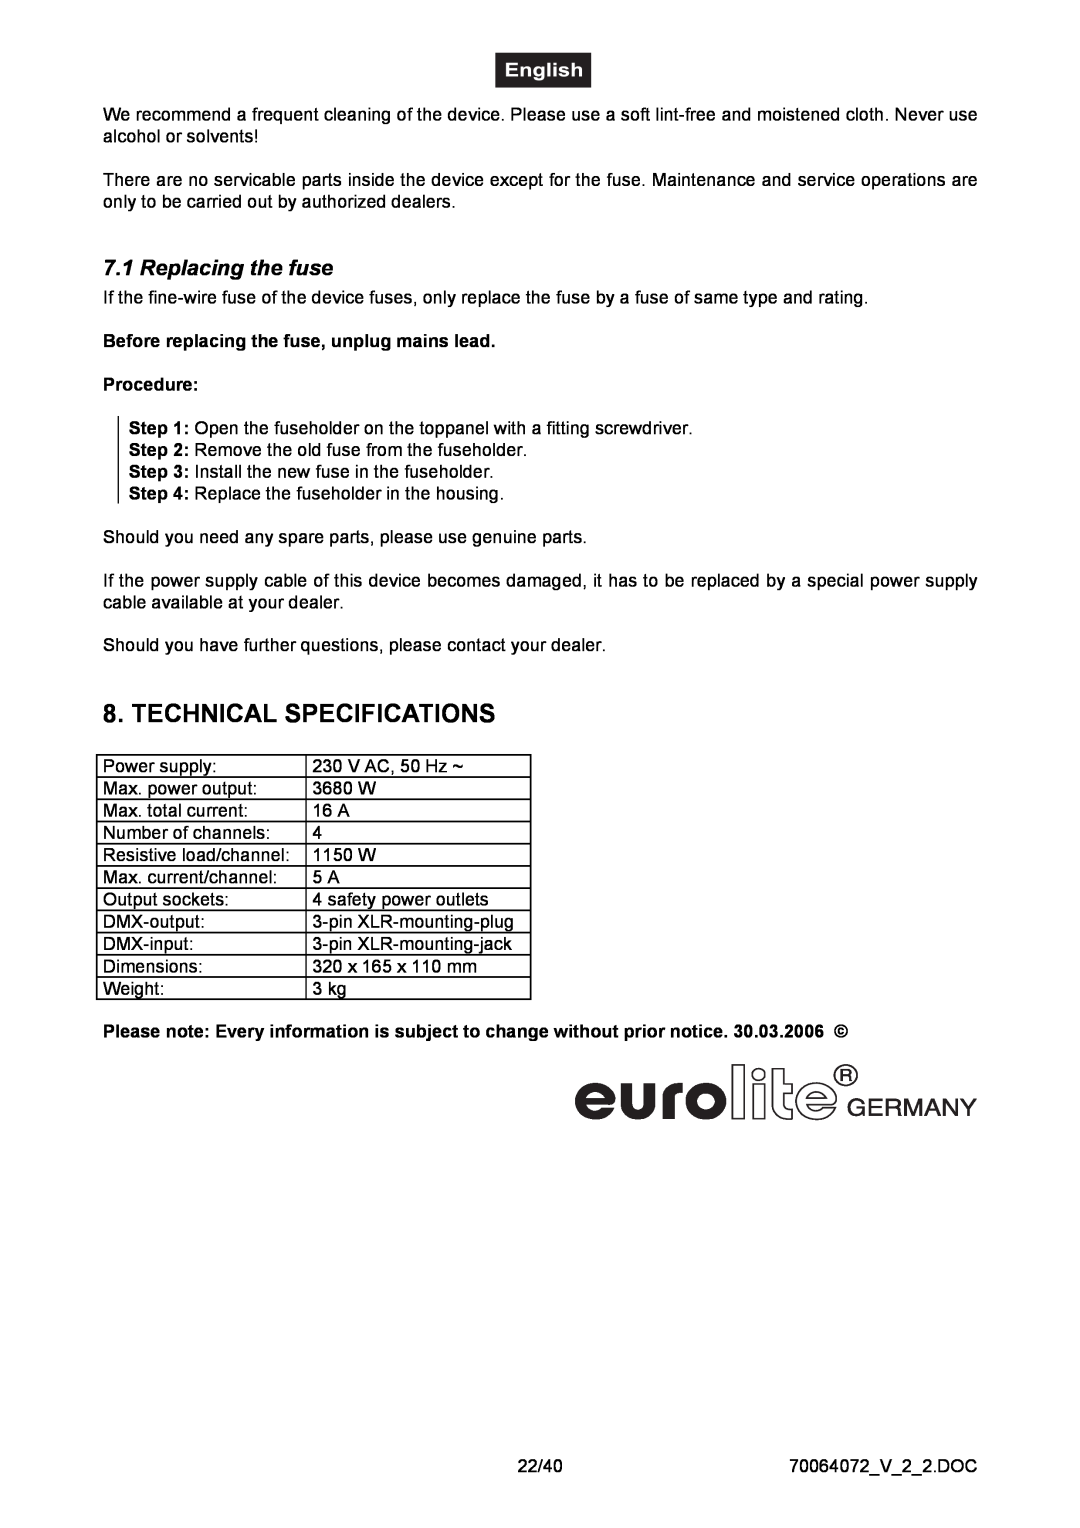 EuroLite Cases EDX-4 Technical Specifications, Replacing the fuse, Before replacing the fuse, unplug mains lead Procedure 